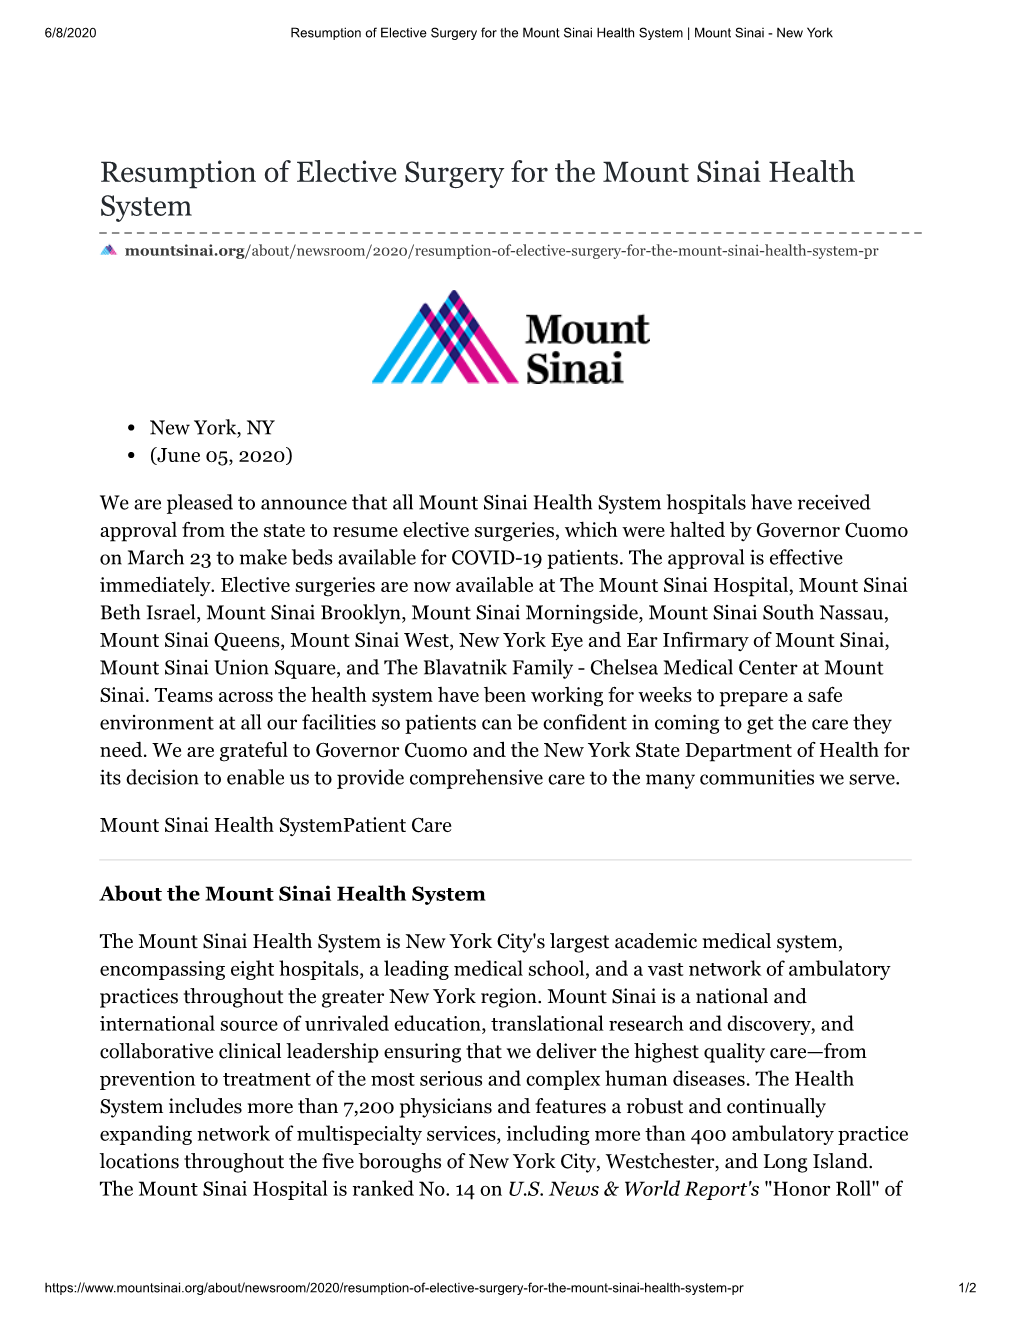 Resumption of Elective Surgery for the Mount Sinai Health System | Mount Sinai - New York